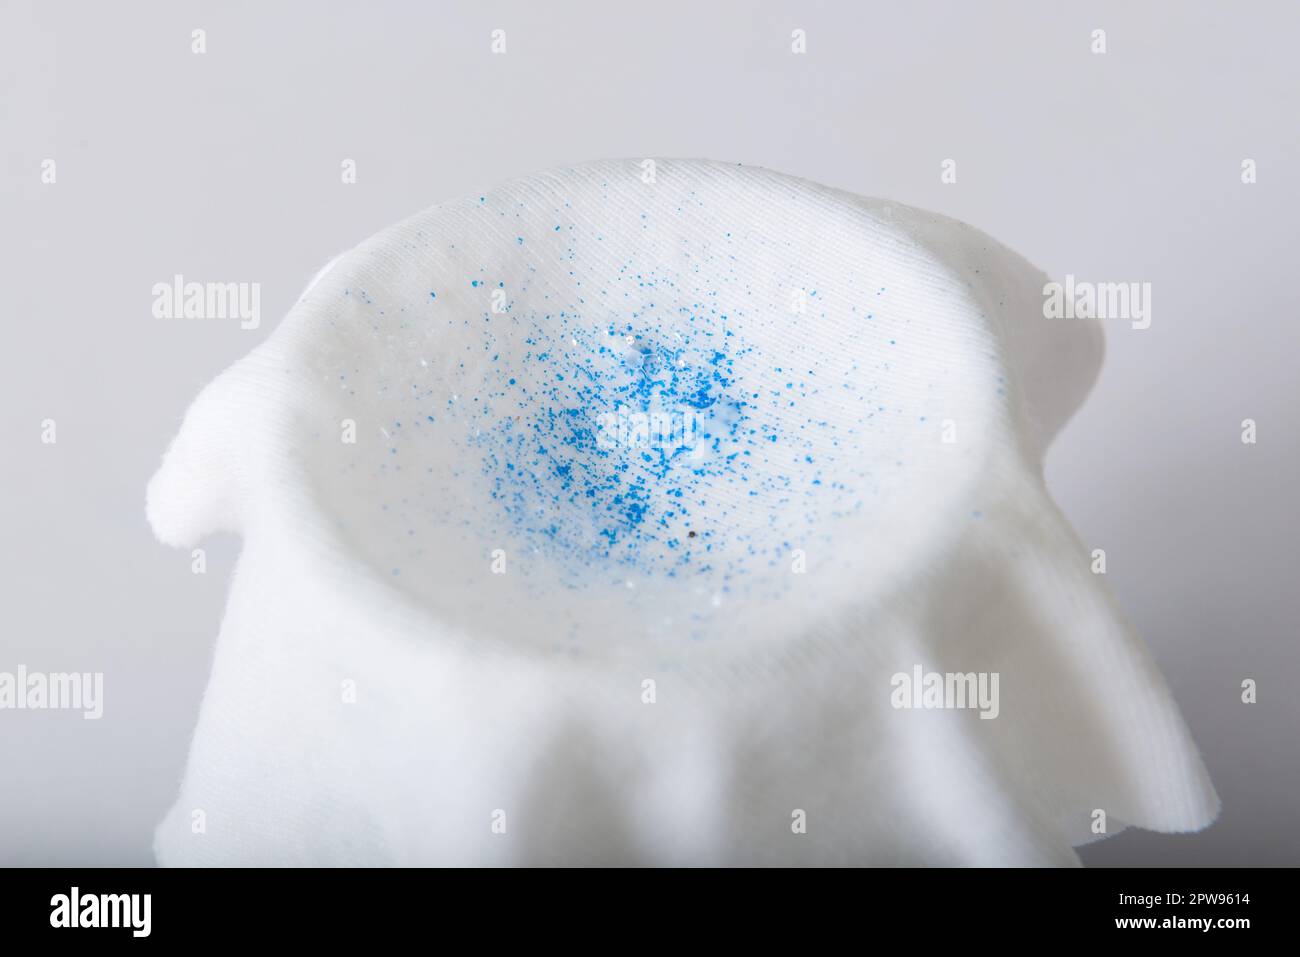 TAMIL NADU, INDIA - March 2023: Microplastics found filtering little drops of cosmetic products mixed with water. Stock Photo